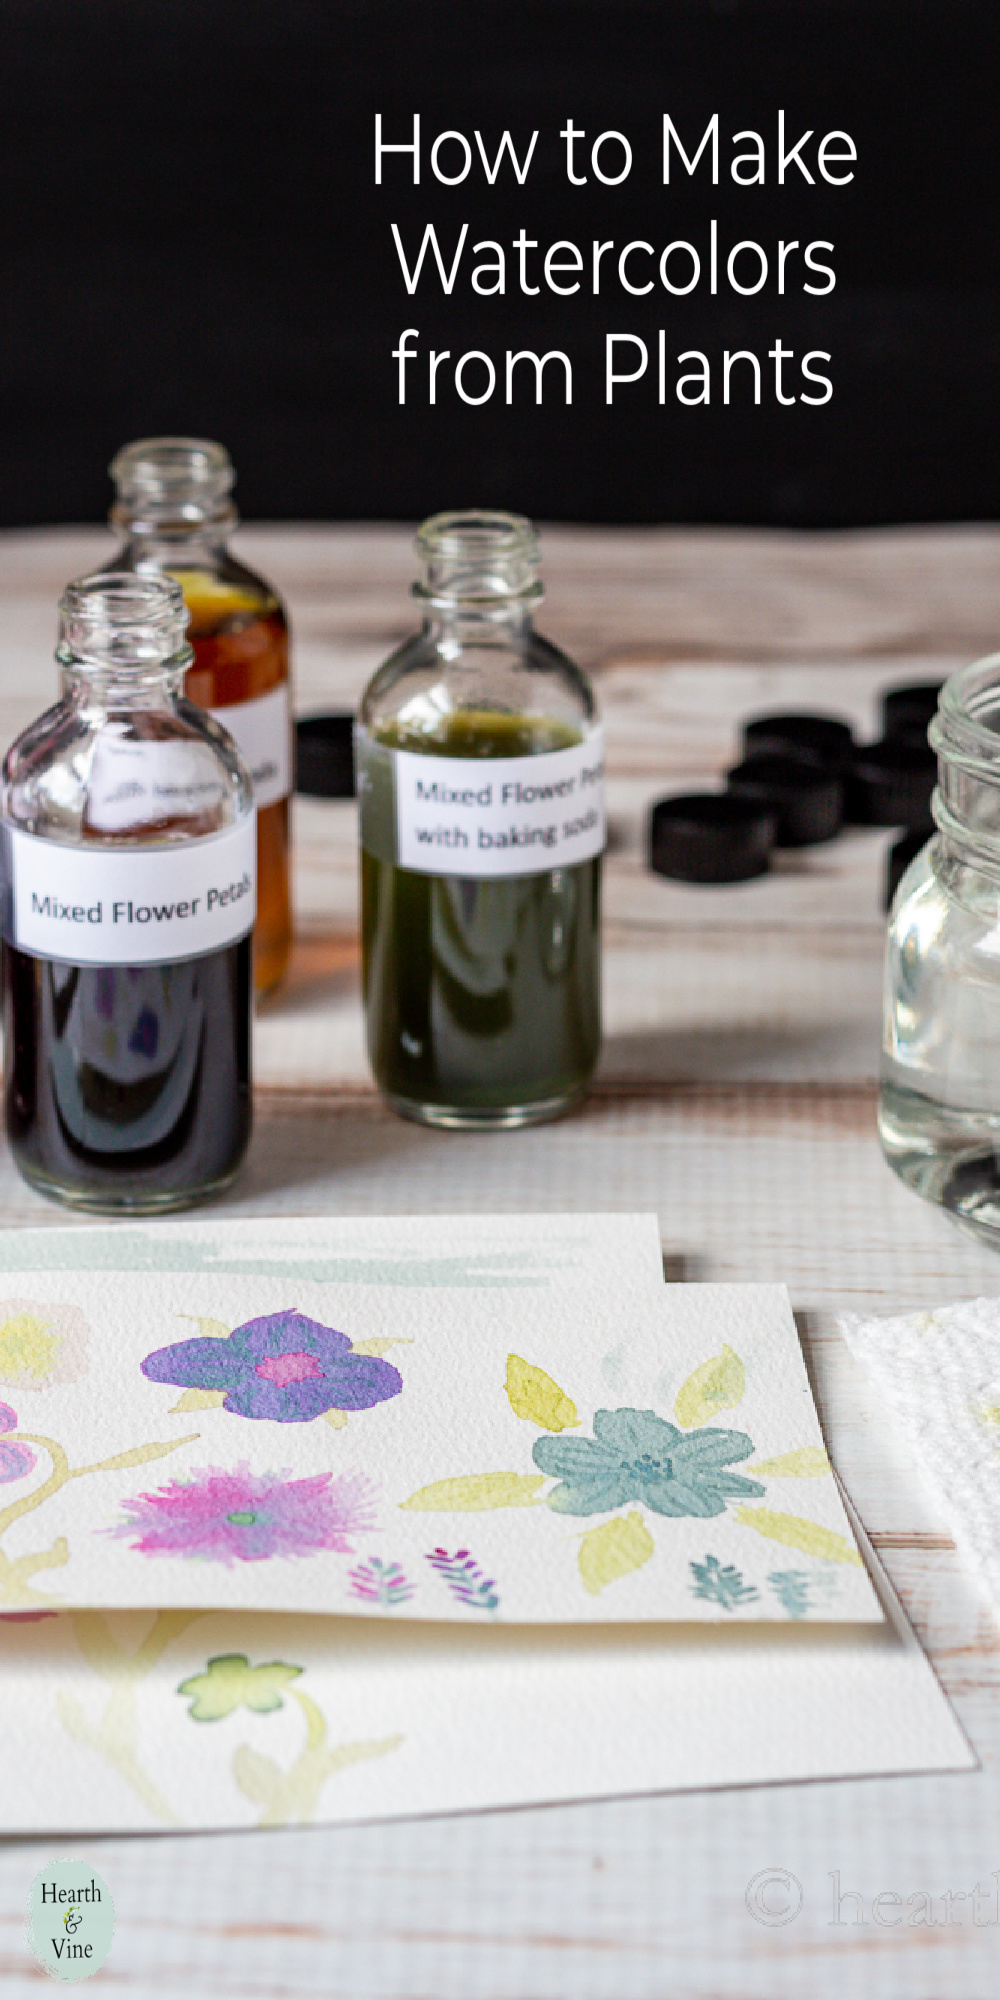 Bottles of watercolors made from plants next to a couple of watercolor card drawings.